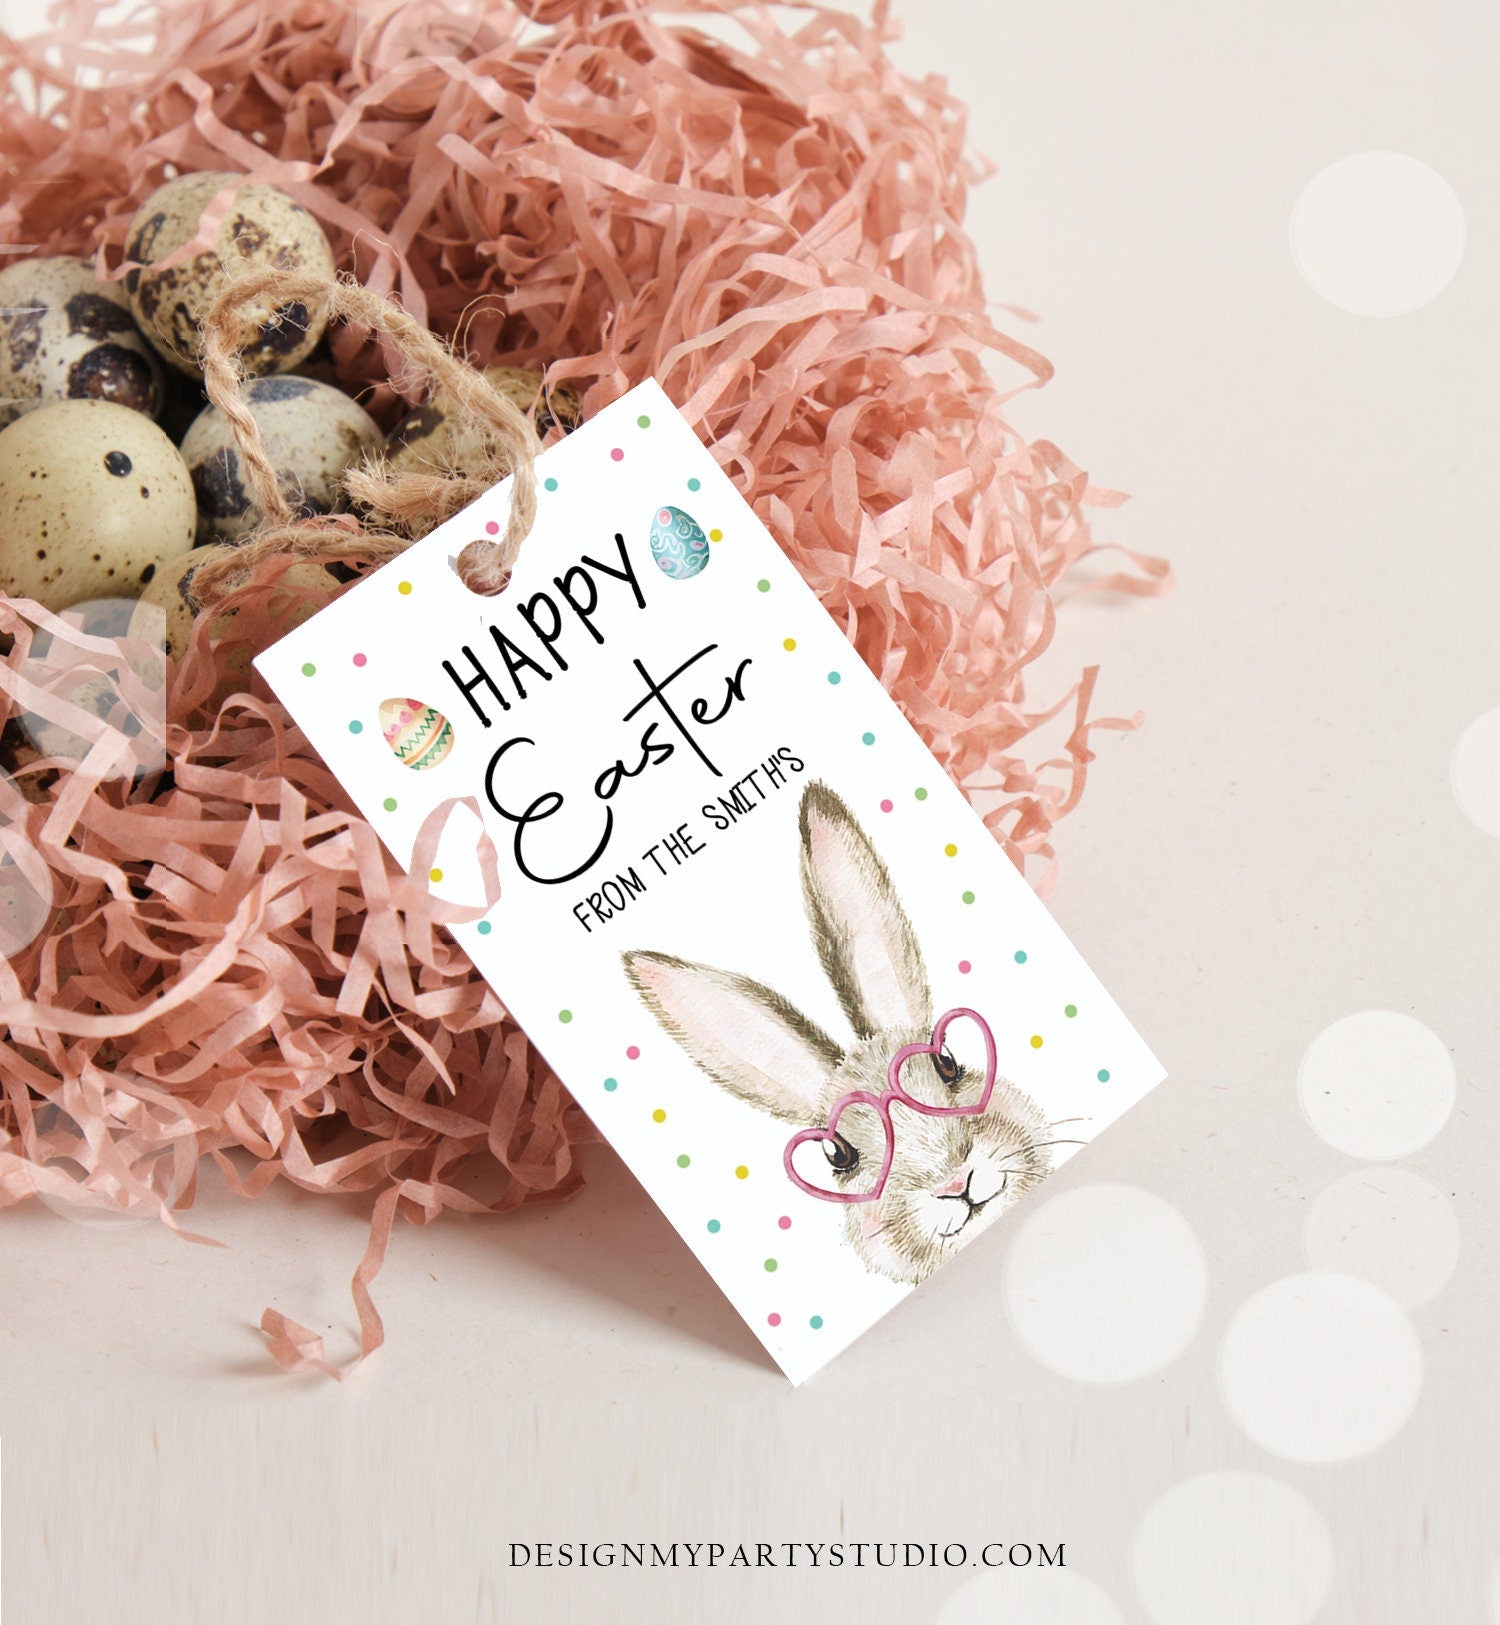 Editable Happy Easter Gift Tags Easter Teacher Appreciation Classroom Favor Tag Bunny Bait Favor Tag Easter Cookie Digital PRINTABLE 0449